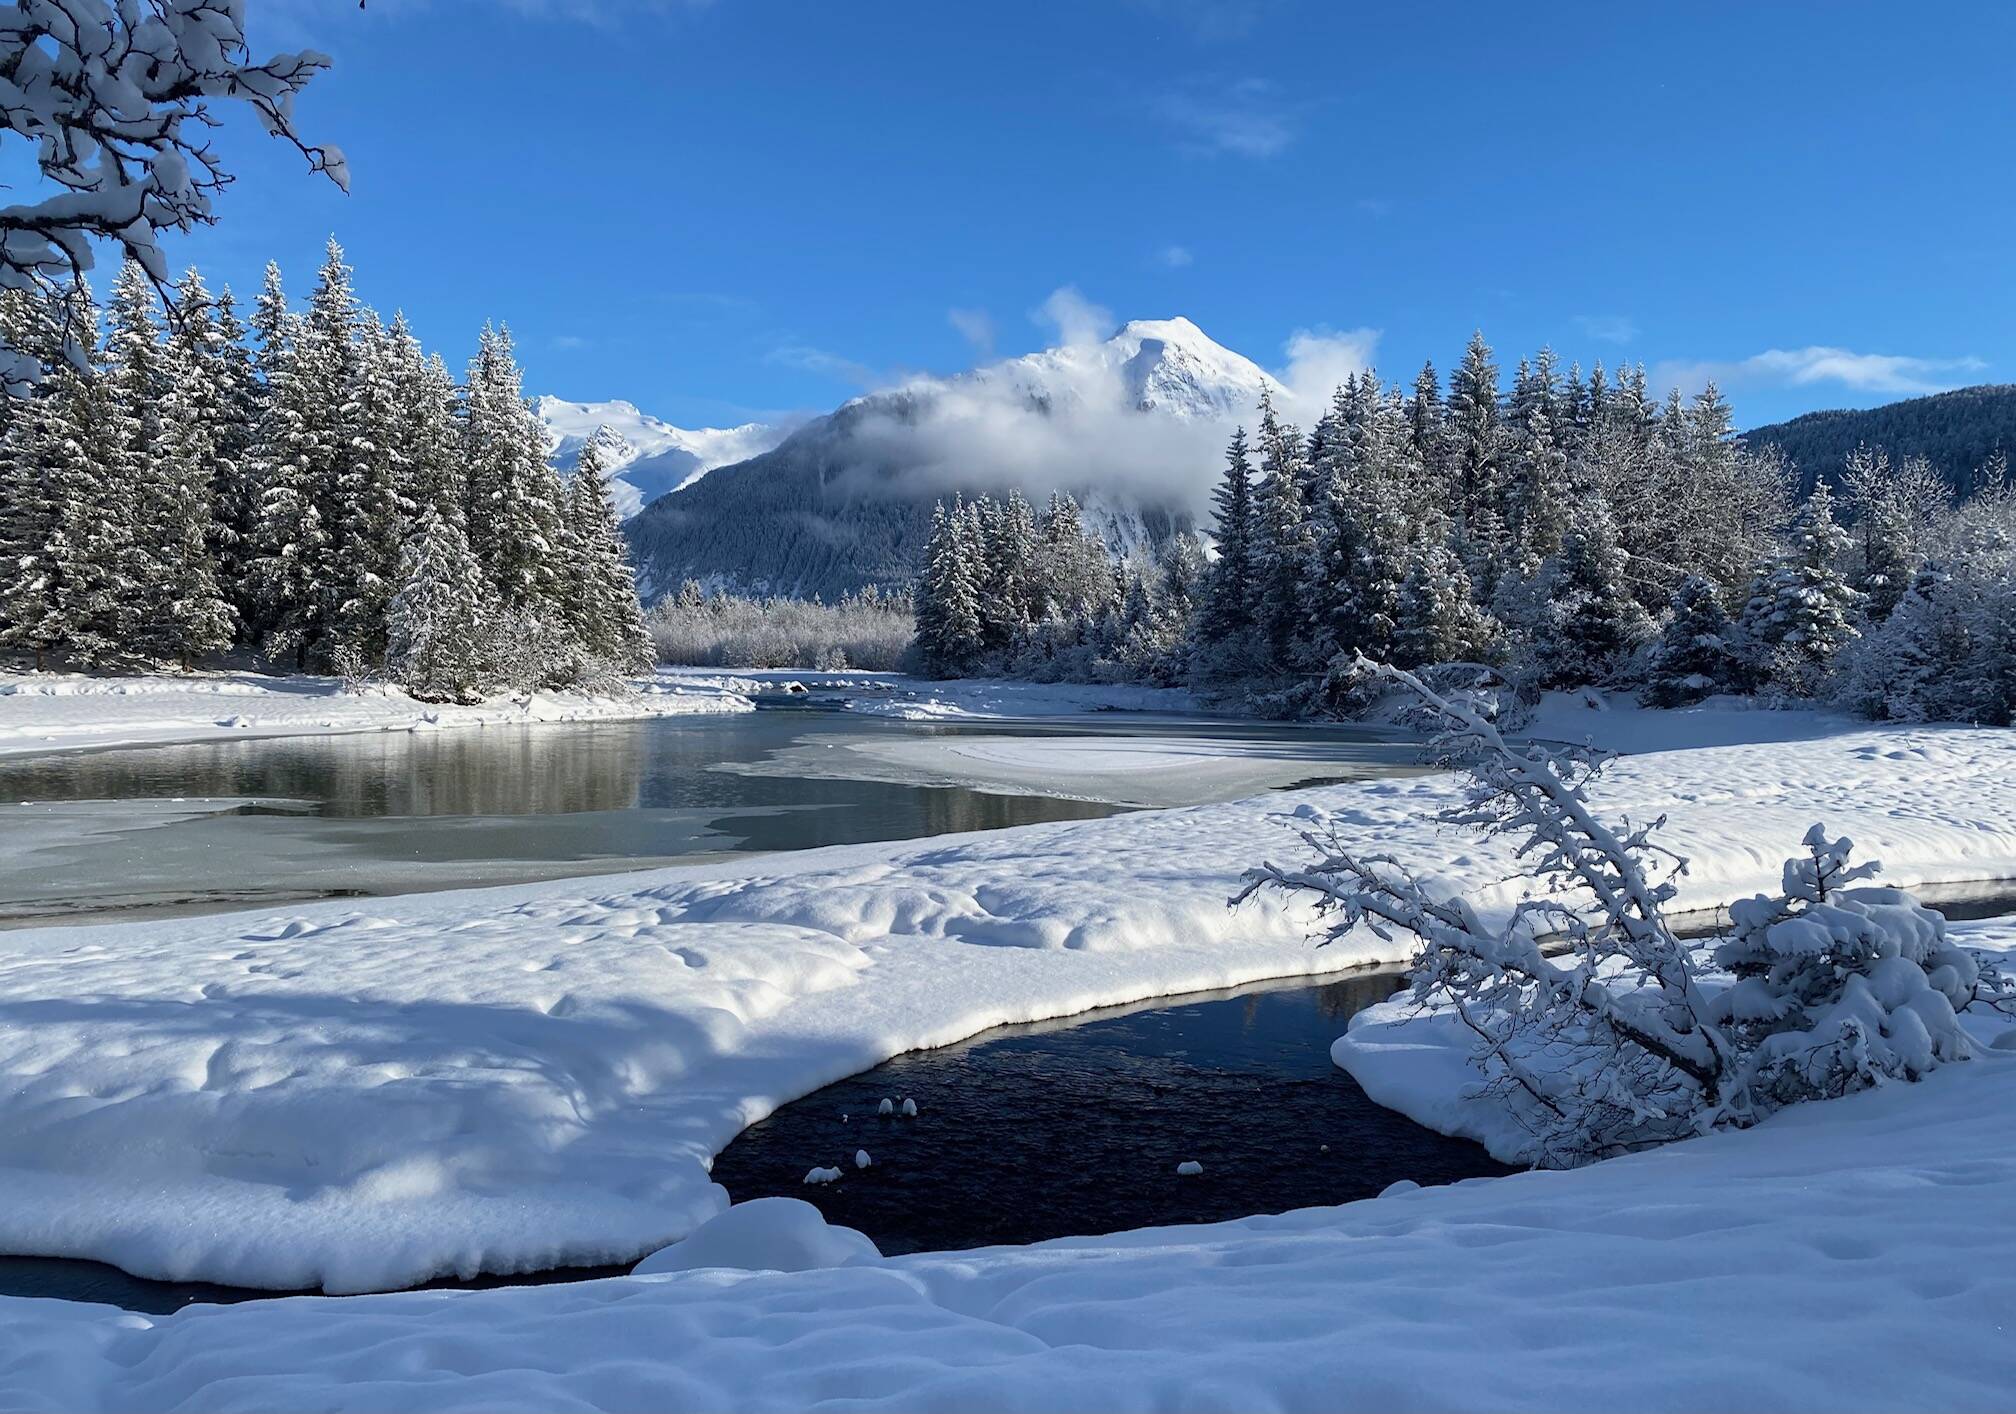 Winter wonderland view from Dredge Lakes Trail. (Courtesy Photo / Denise Carroll)